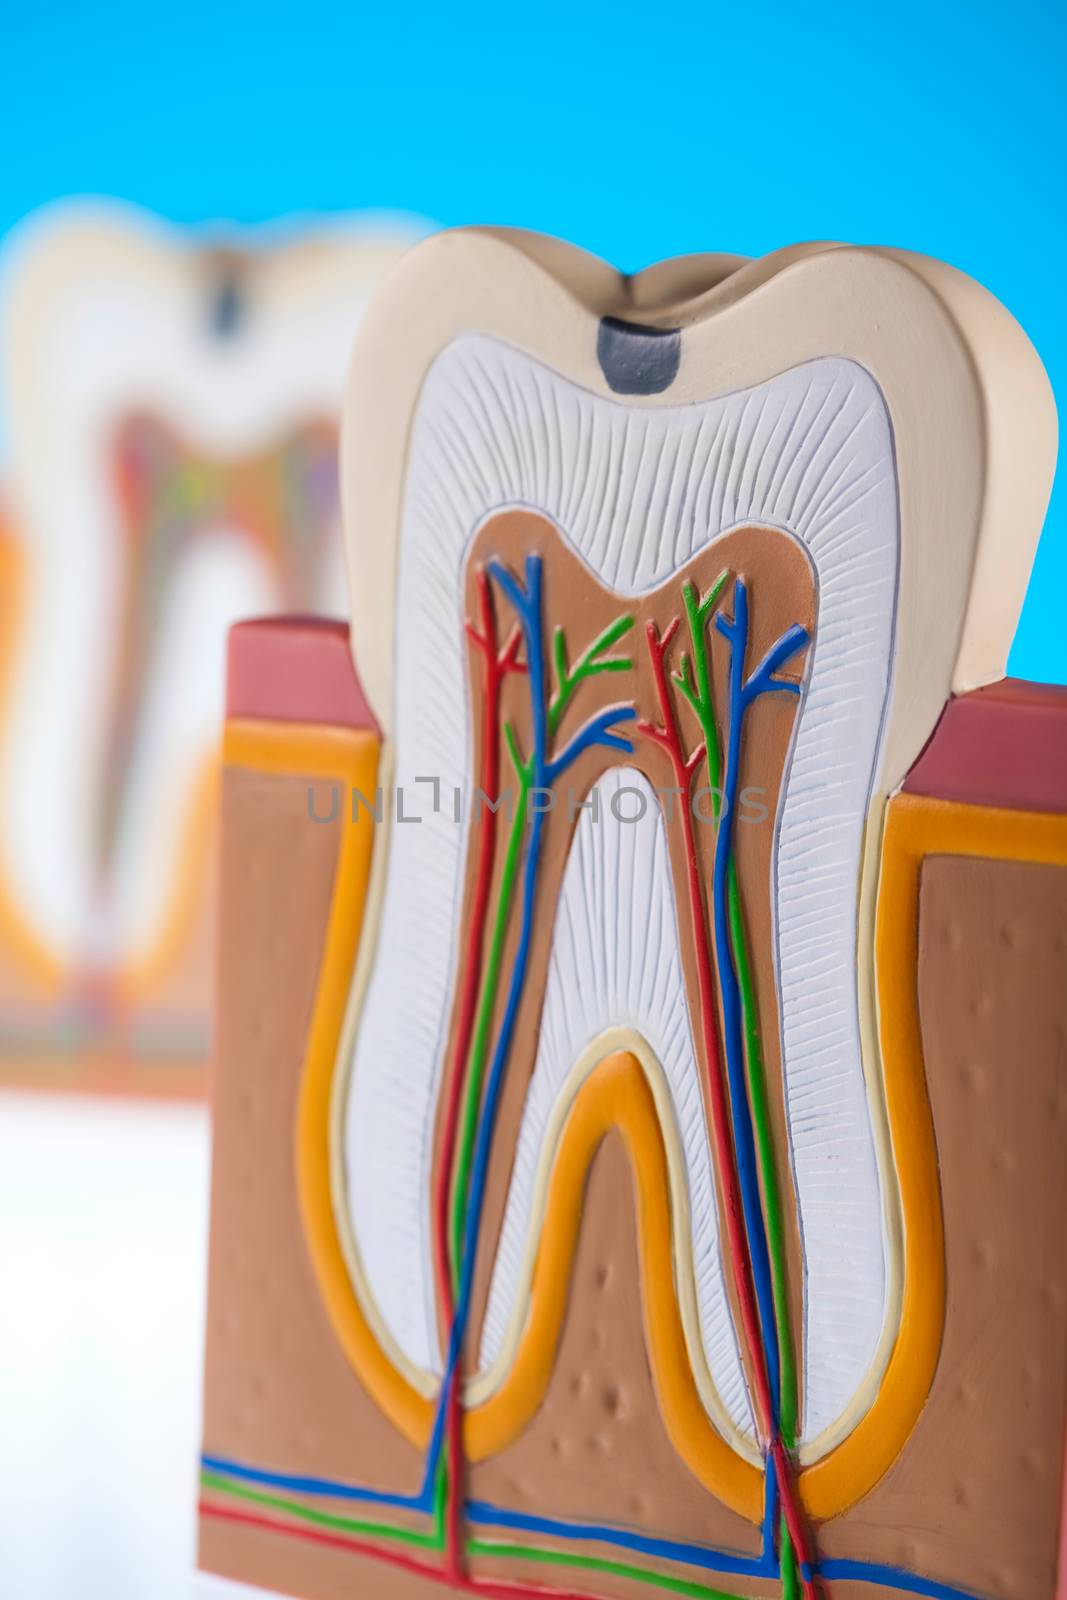 Anatomy of the tooth, bright colorful tone concept